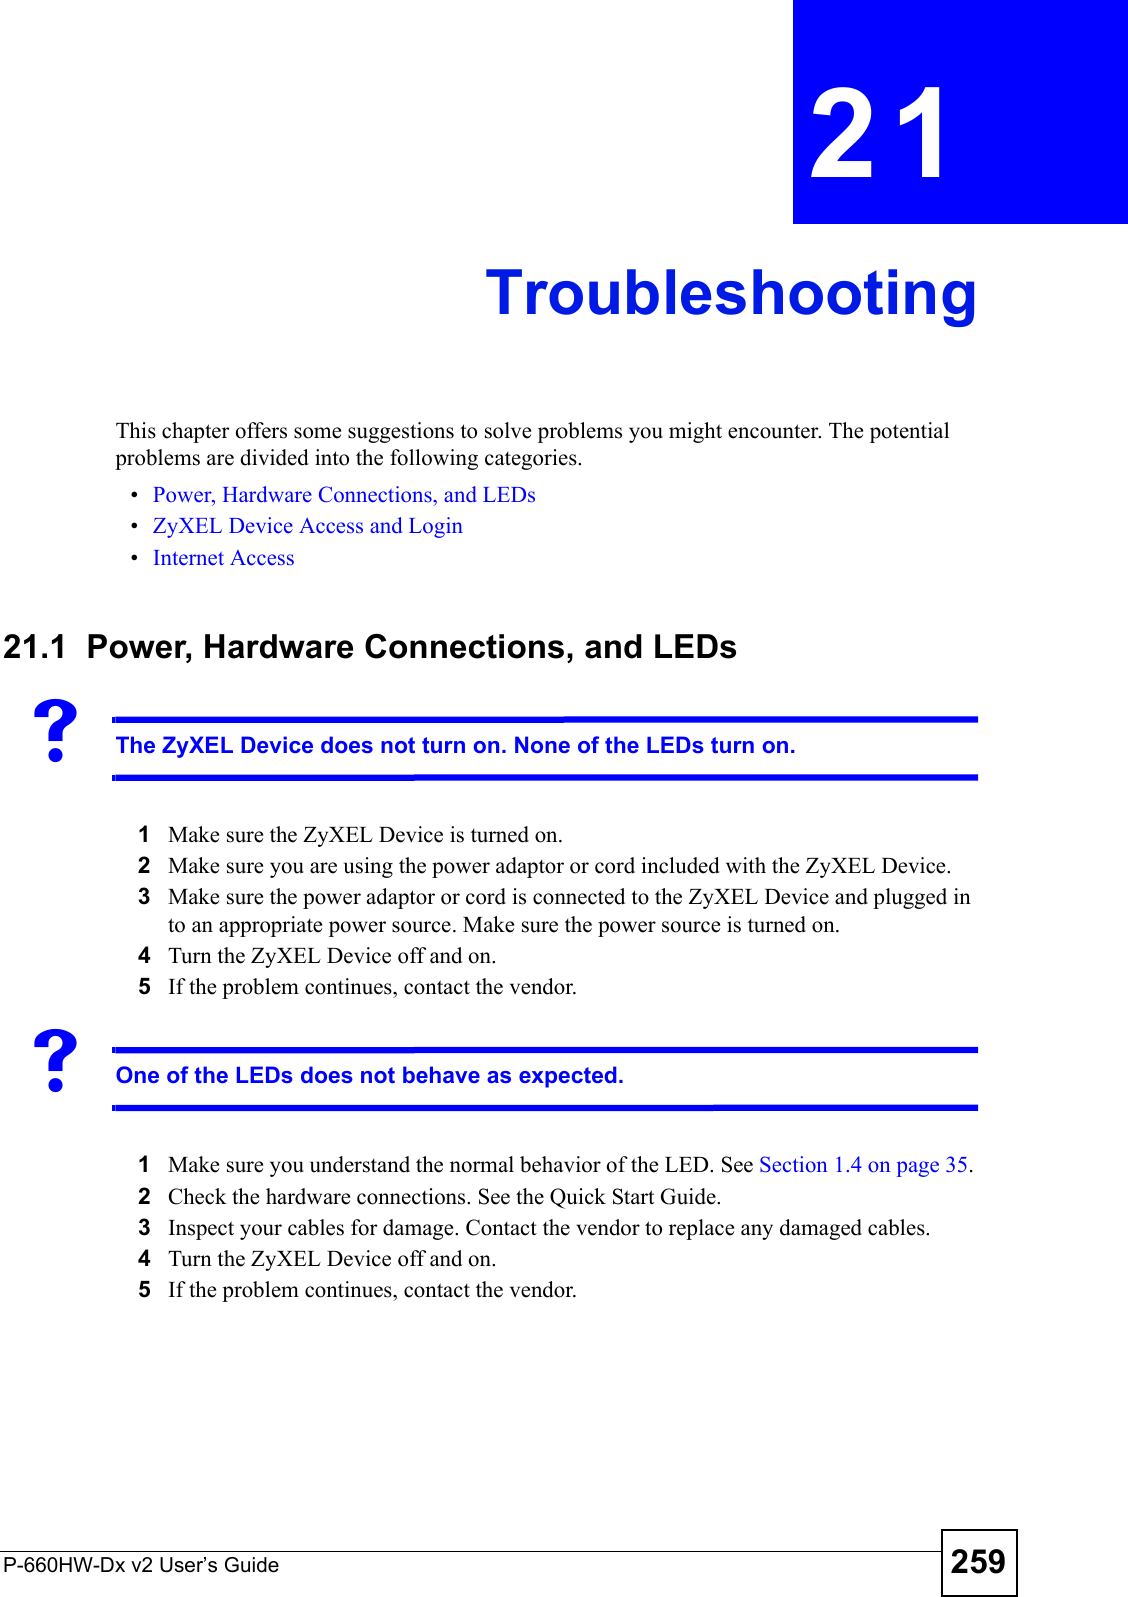 P-660HW-Dx v2 User’s Guide 259CHAPTER  21 TroubleshootingThis chapter offers some suggestions to solve problems you might encounter. The potential problems are divided into the following categories. •Power, Hardware Connections, and LEDs•ZyXEL Device Access and Login•Internet Access21.1  Power, Hardware Connections, and LEDsVThe ZyXEL Device does not turn on. None of the LEDs turn on.1Make sure the ZyXEL Device is turned on. 2Make sure you are using the power adaptor or cord included with the ZyXEL Device.3Make sure the power adaptor or cord is connected to the ZyXEL Device and plugged in to an appropriate power source. Make sure the power source is turned on.4Turn the ZyXEL Device off and on. 5If the problem continues, contact the vendor.VOne of the LEDs does not behave as expected.1Make sure you understand the normal behavior of the LED. See Section 1.4 on page 35.2Check the hardware connections. See the Quick Start Guide.3Inspect your cables for damage. Contact the vendor to replace any damaged cables.4Turn the ZyXEL Device off and on. 5If the problem continues, contact the vendor.